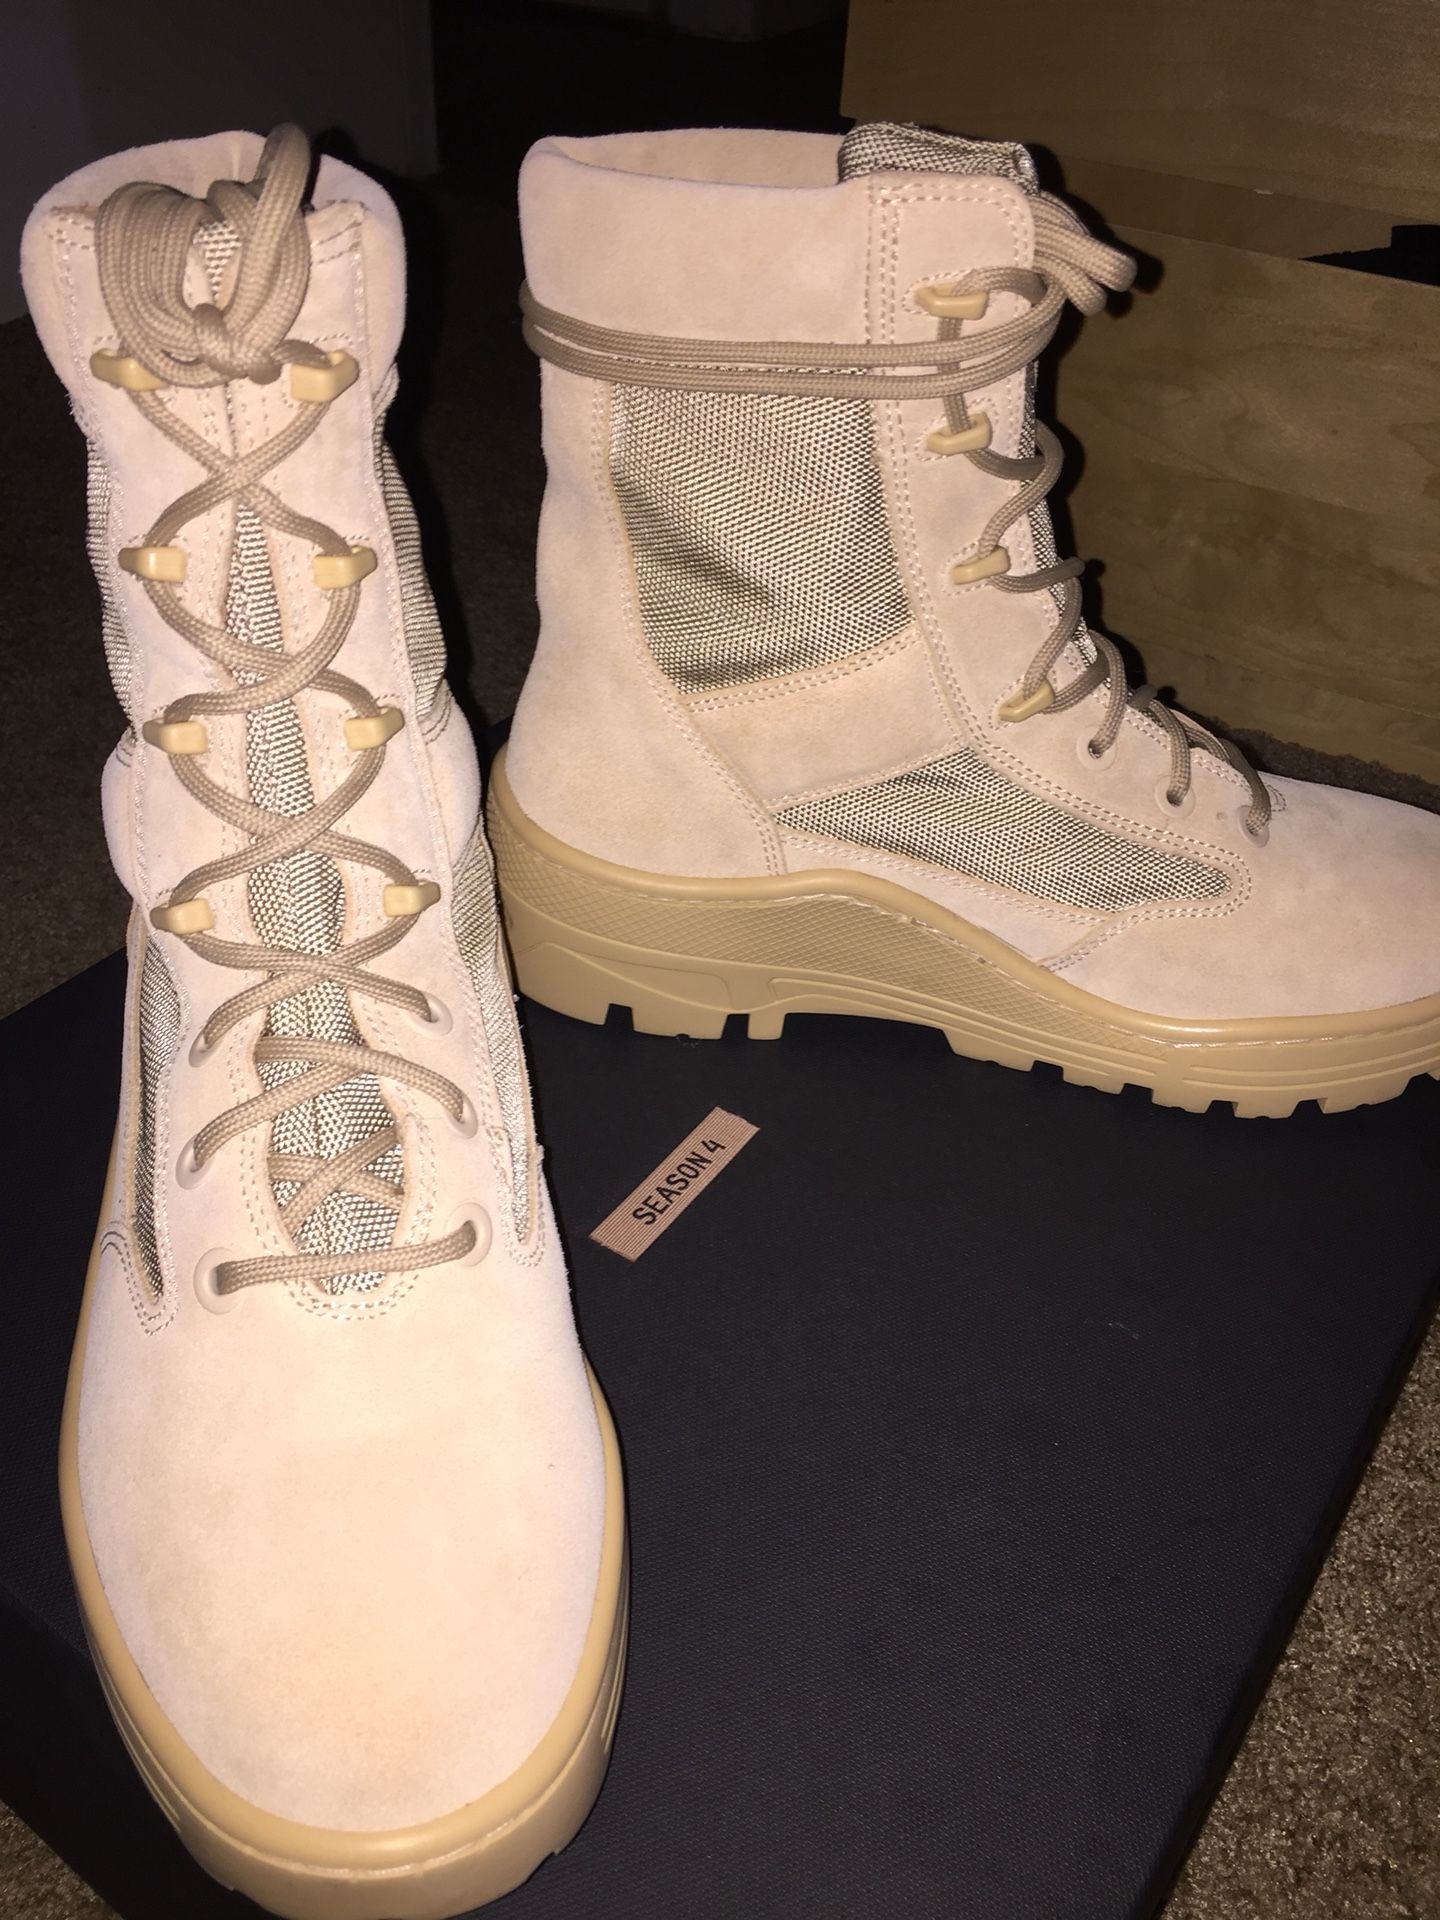 Yeezy Combat Boot Season 4 Sand for Sale in OfferUp